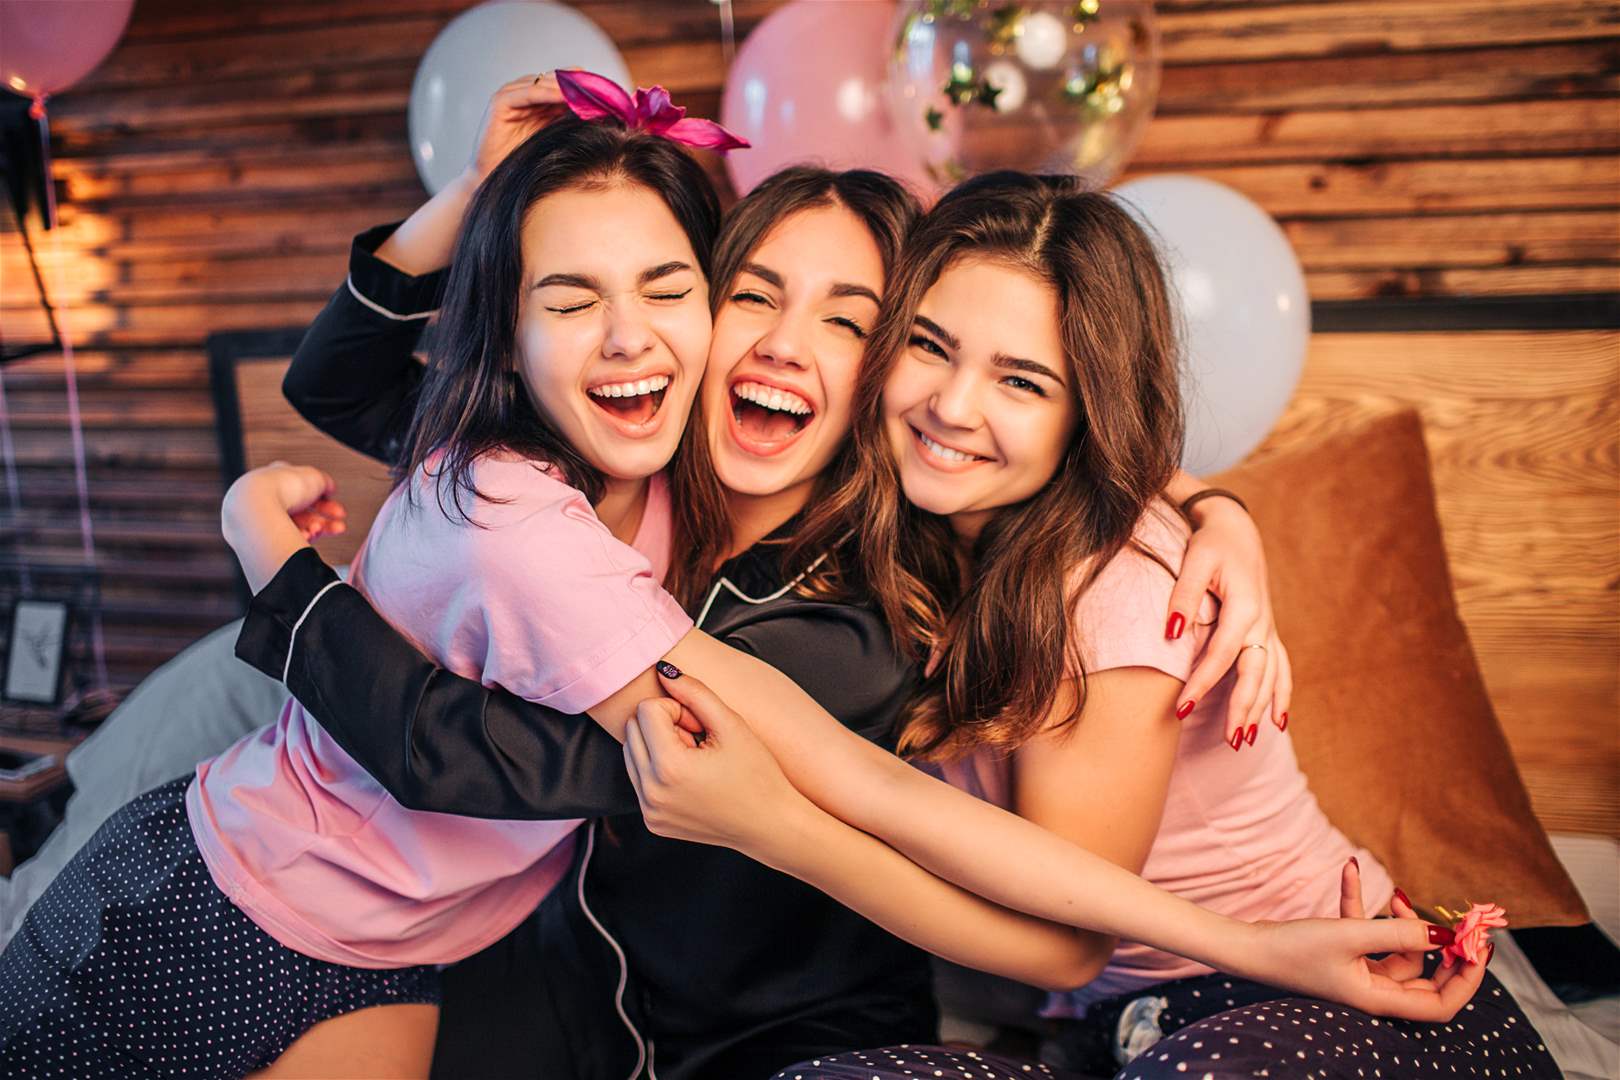 How much happier do friends make you?